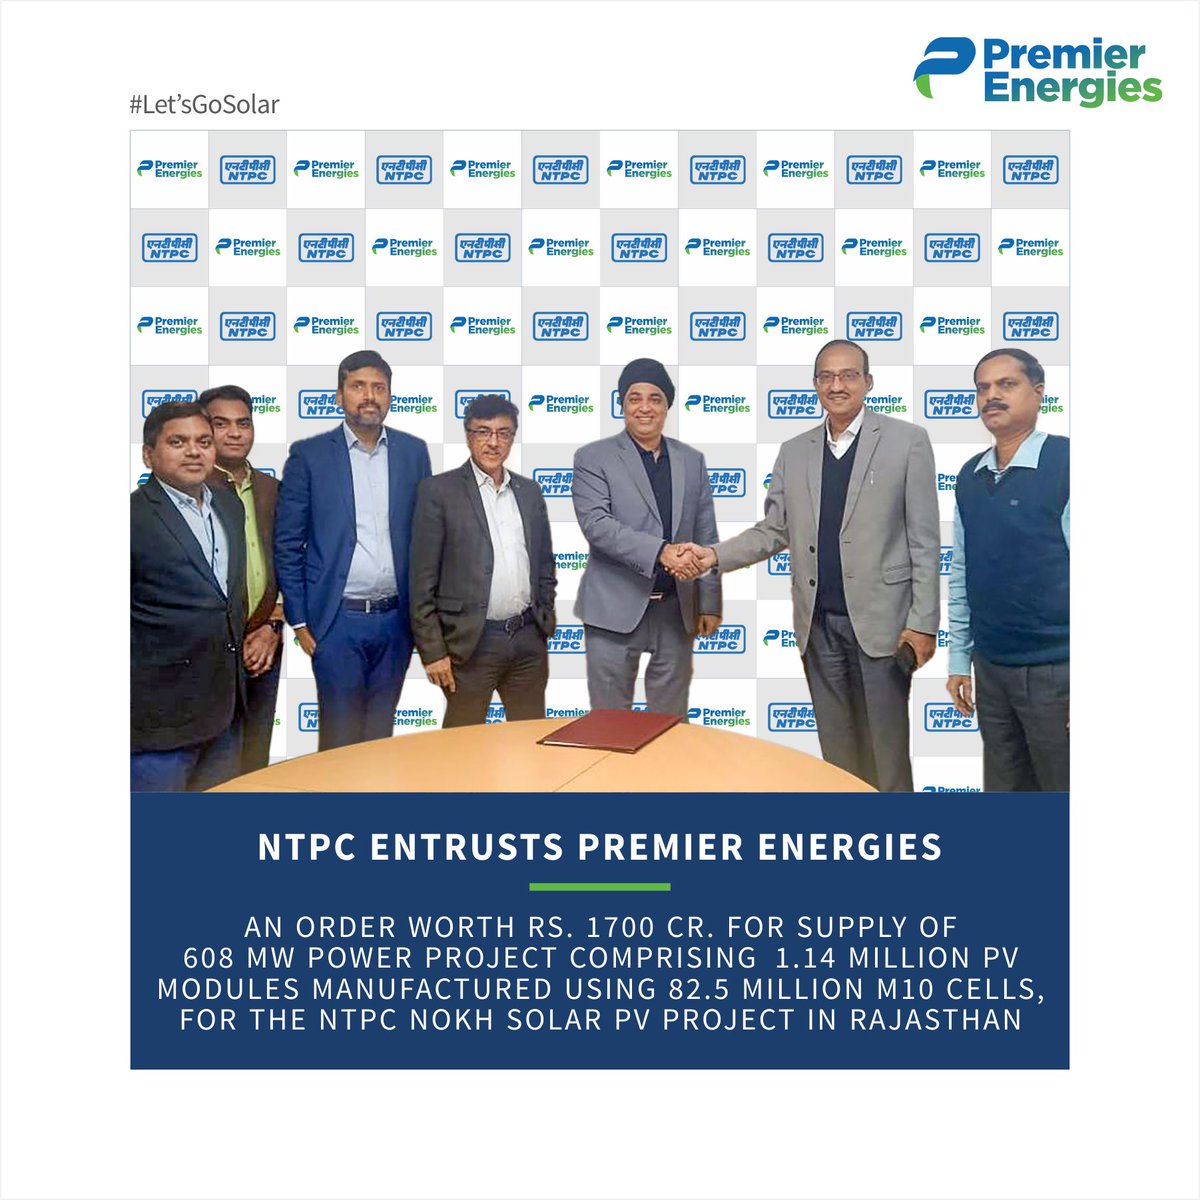 Upcoming ipo 

Premier Energies has been awarded an order worth Rs. 1700 Cr. for supply of 608 MW power project, comprising 1.14 million PV Modules manufactured using 82.5 million M10 Cells, for the NTPC NOKH Solar PV Project in Rajasthan.
#SolarEnergy #PremierEnergies…